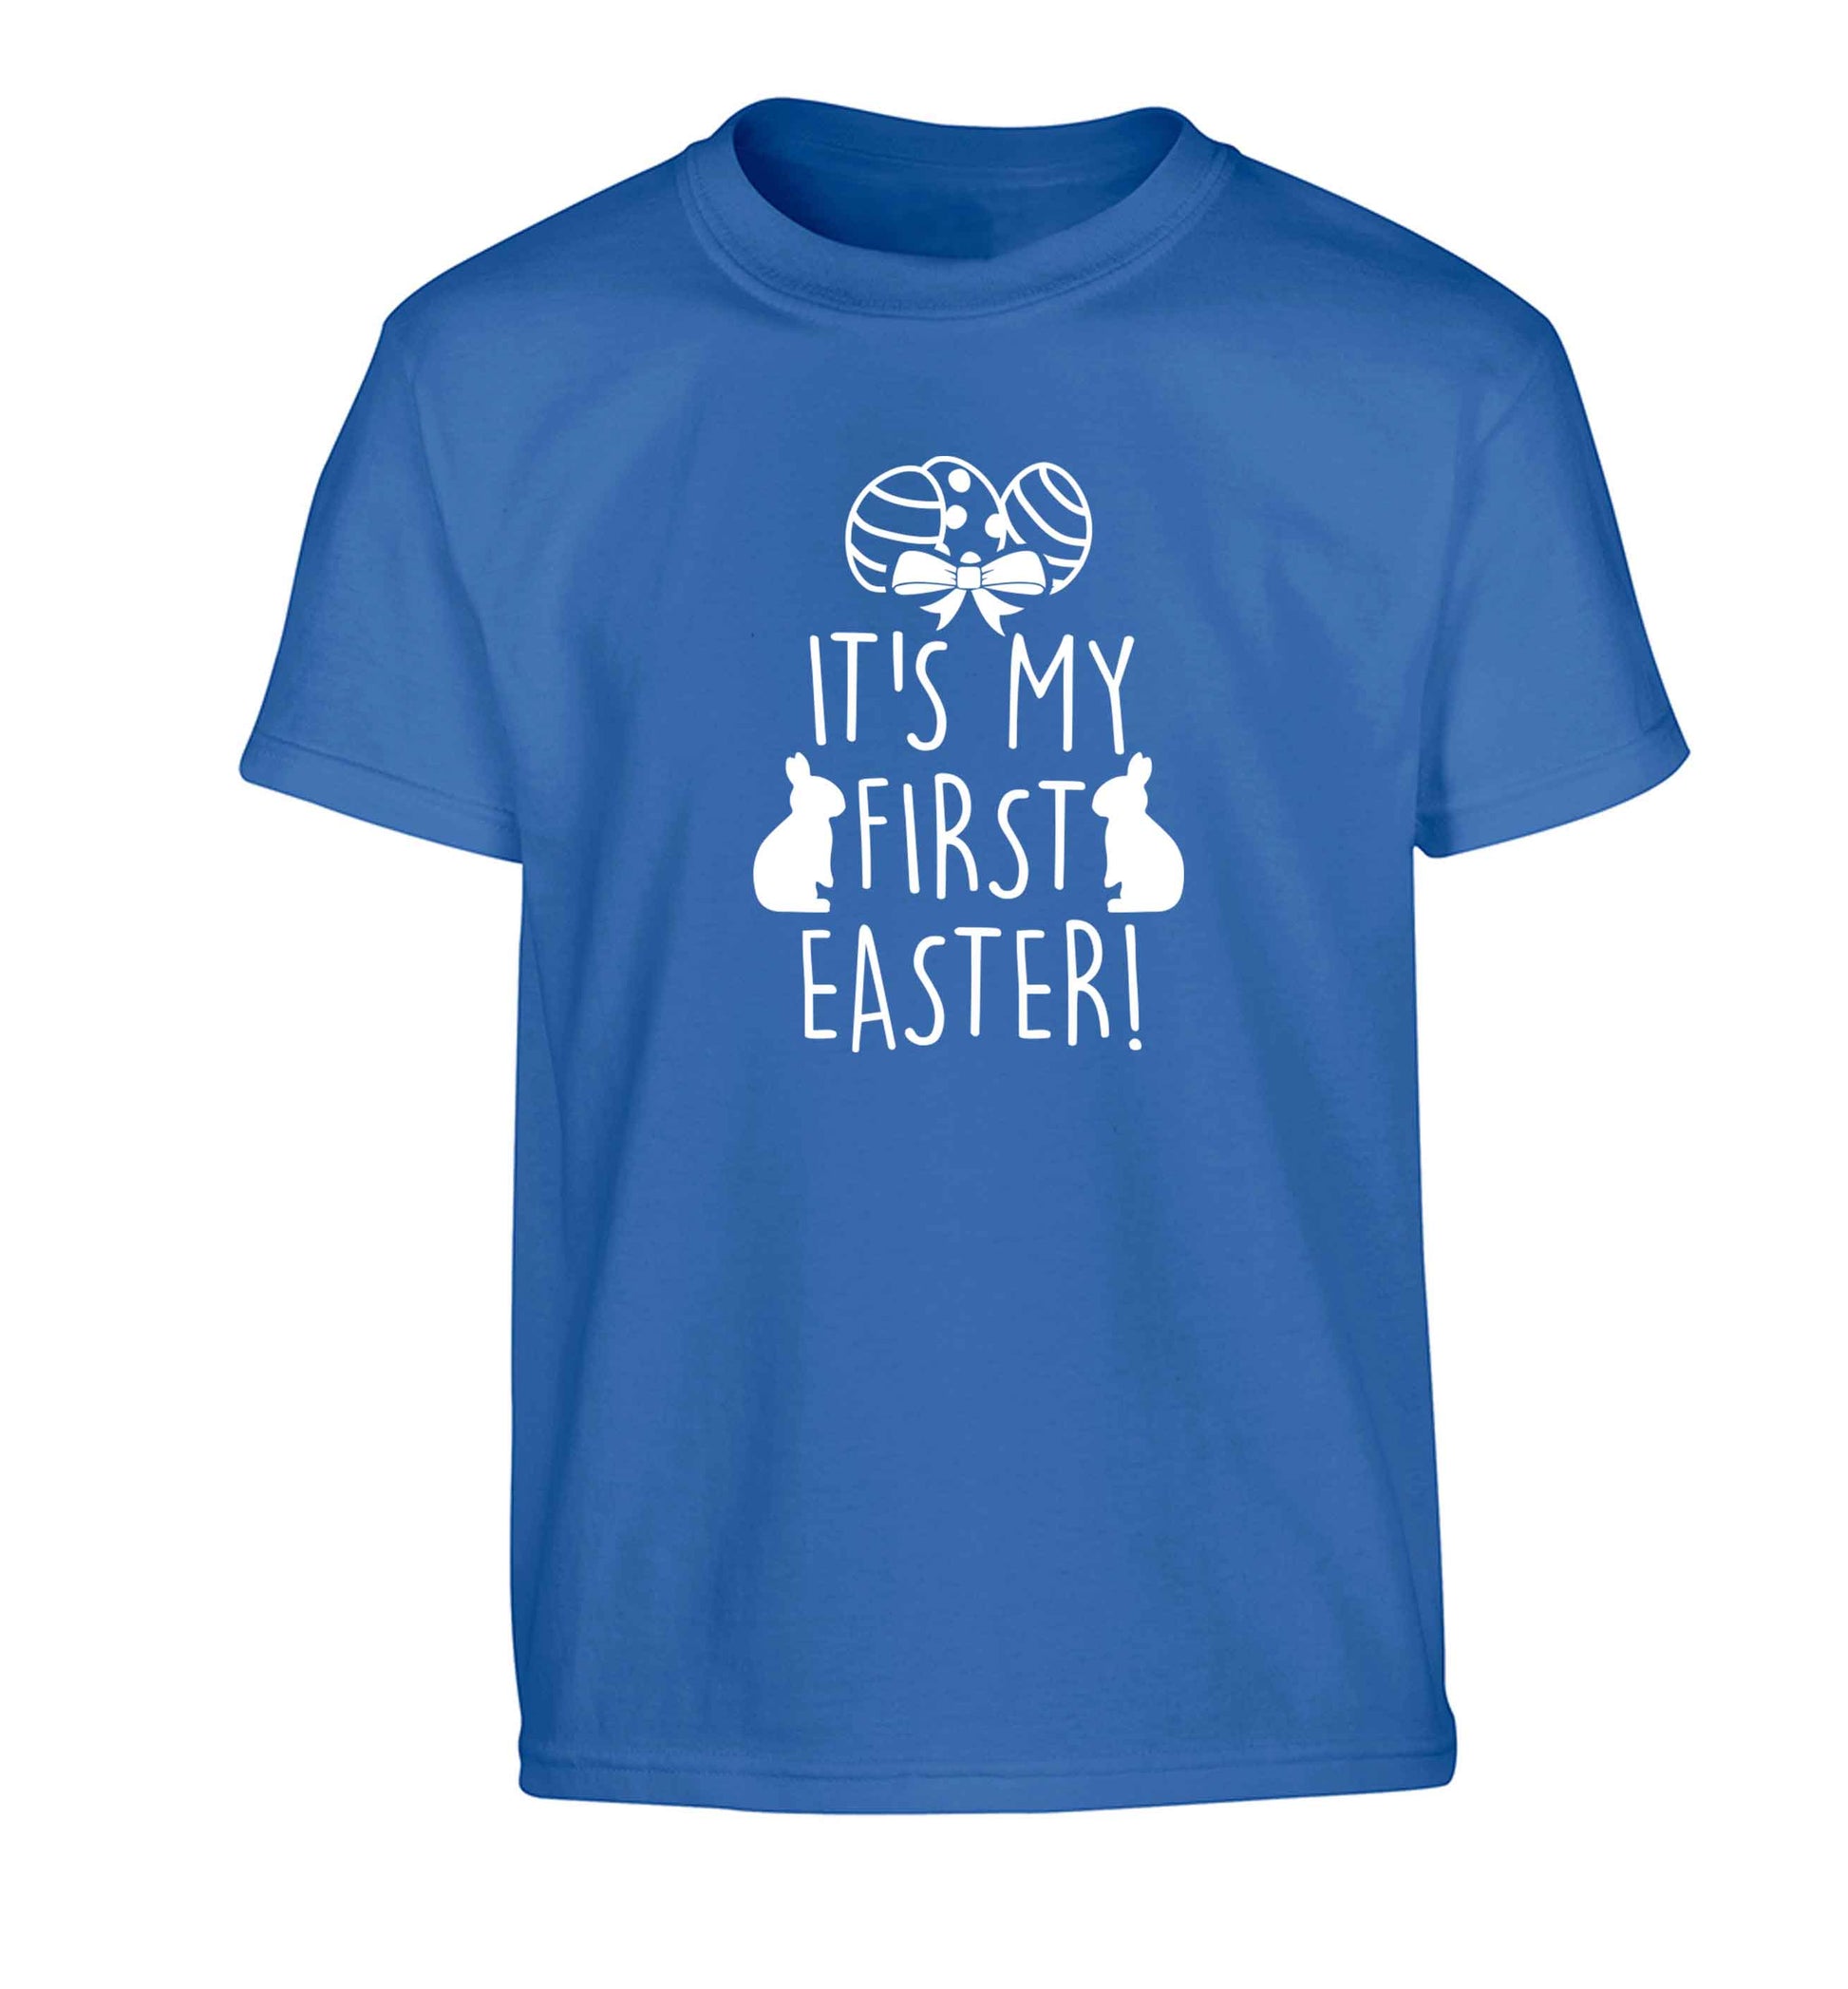 It's my first Easter Children's blue Tshirt 12-13 Years